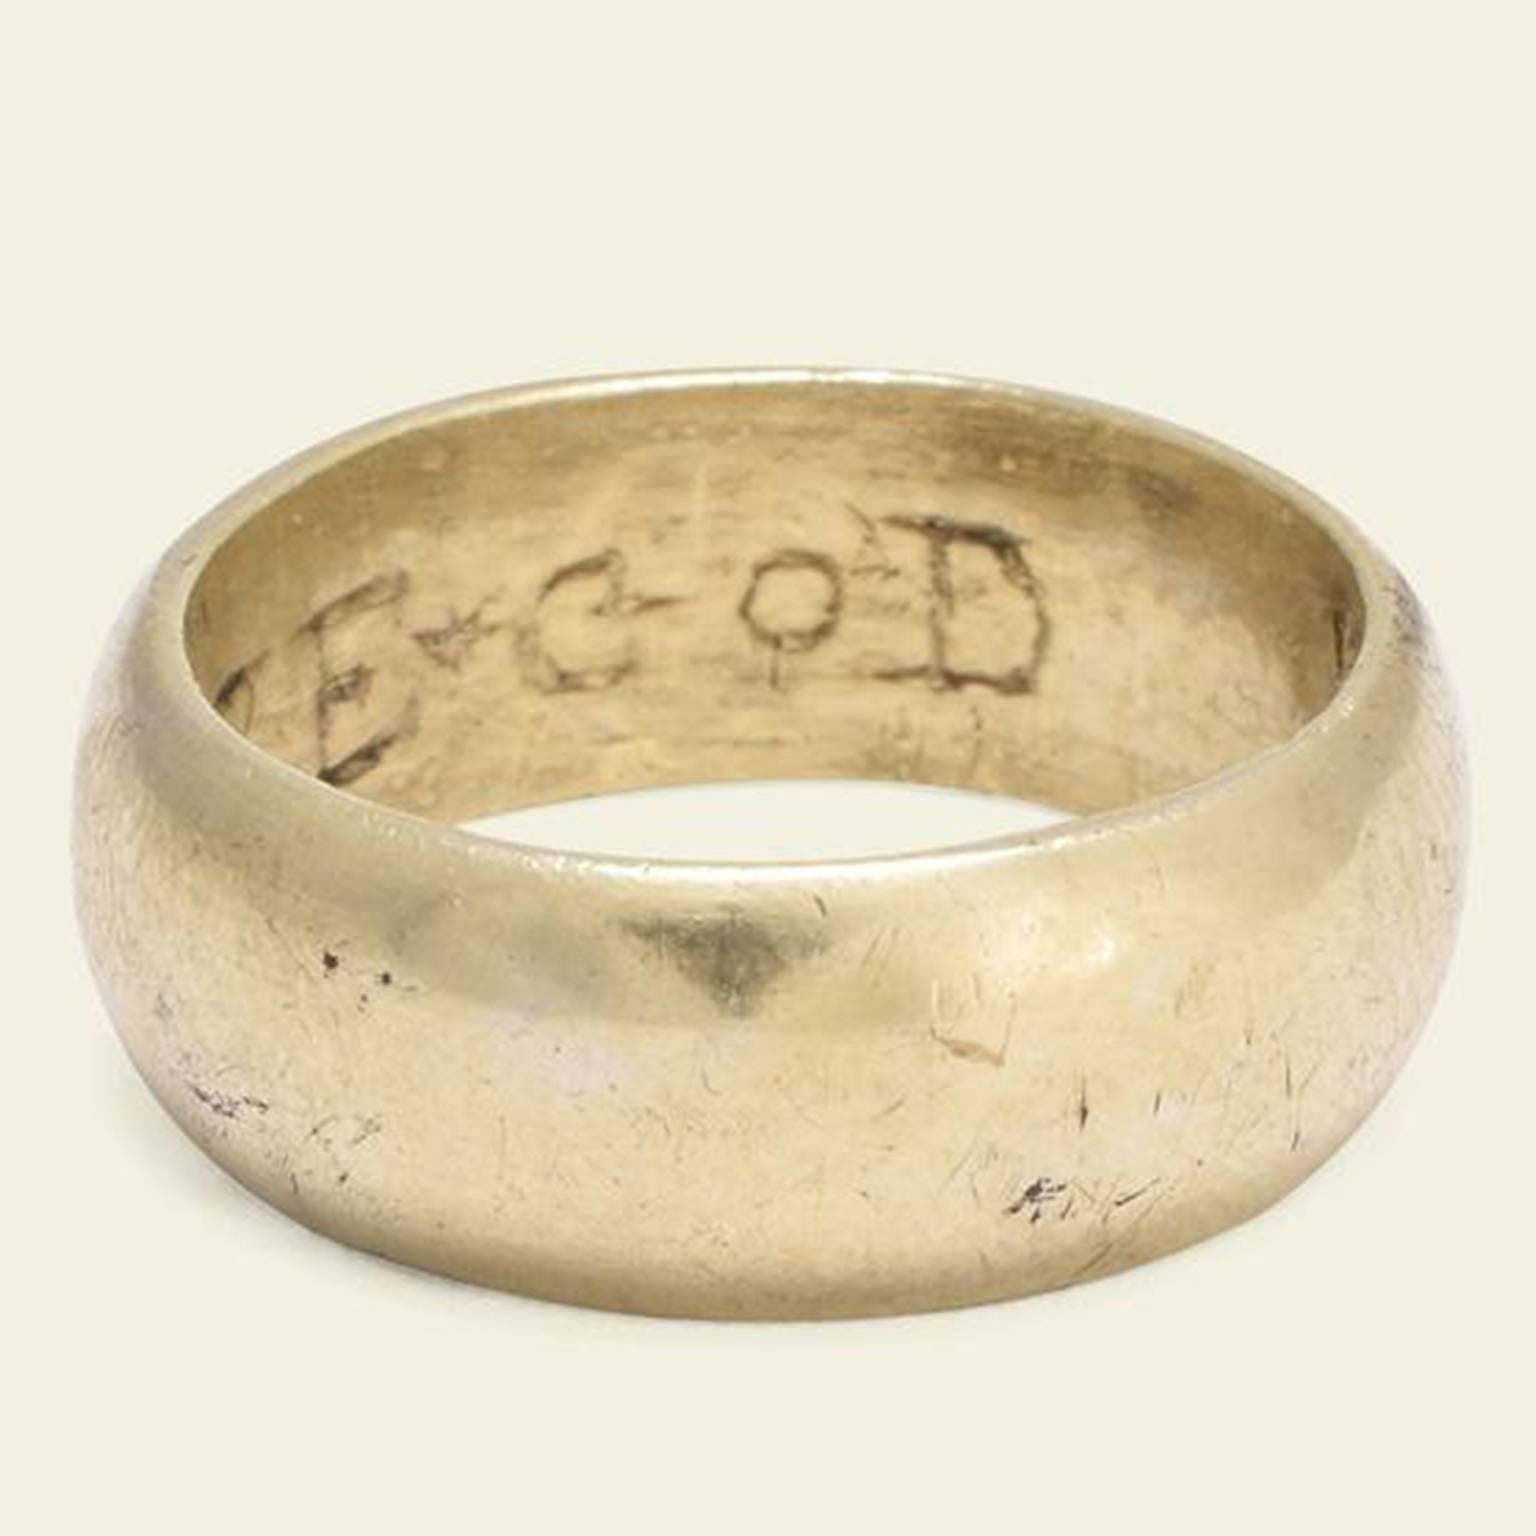 This gilt silver post-Medieval poesy ring reads 